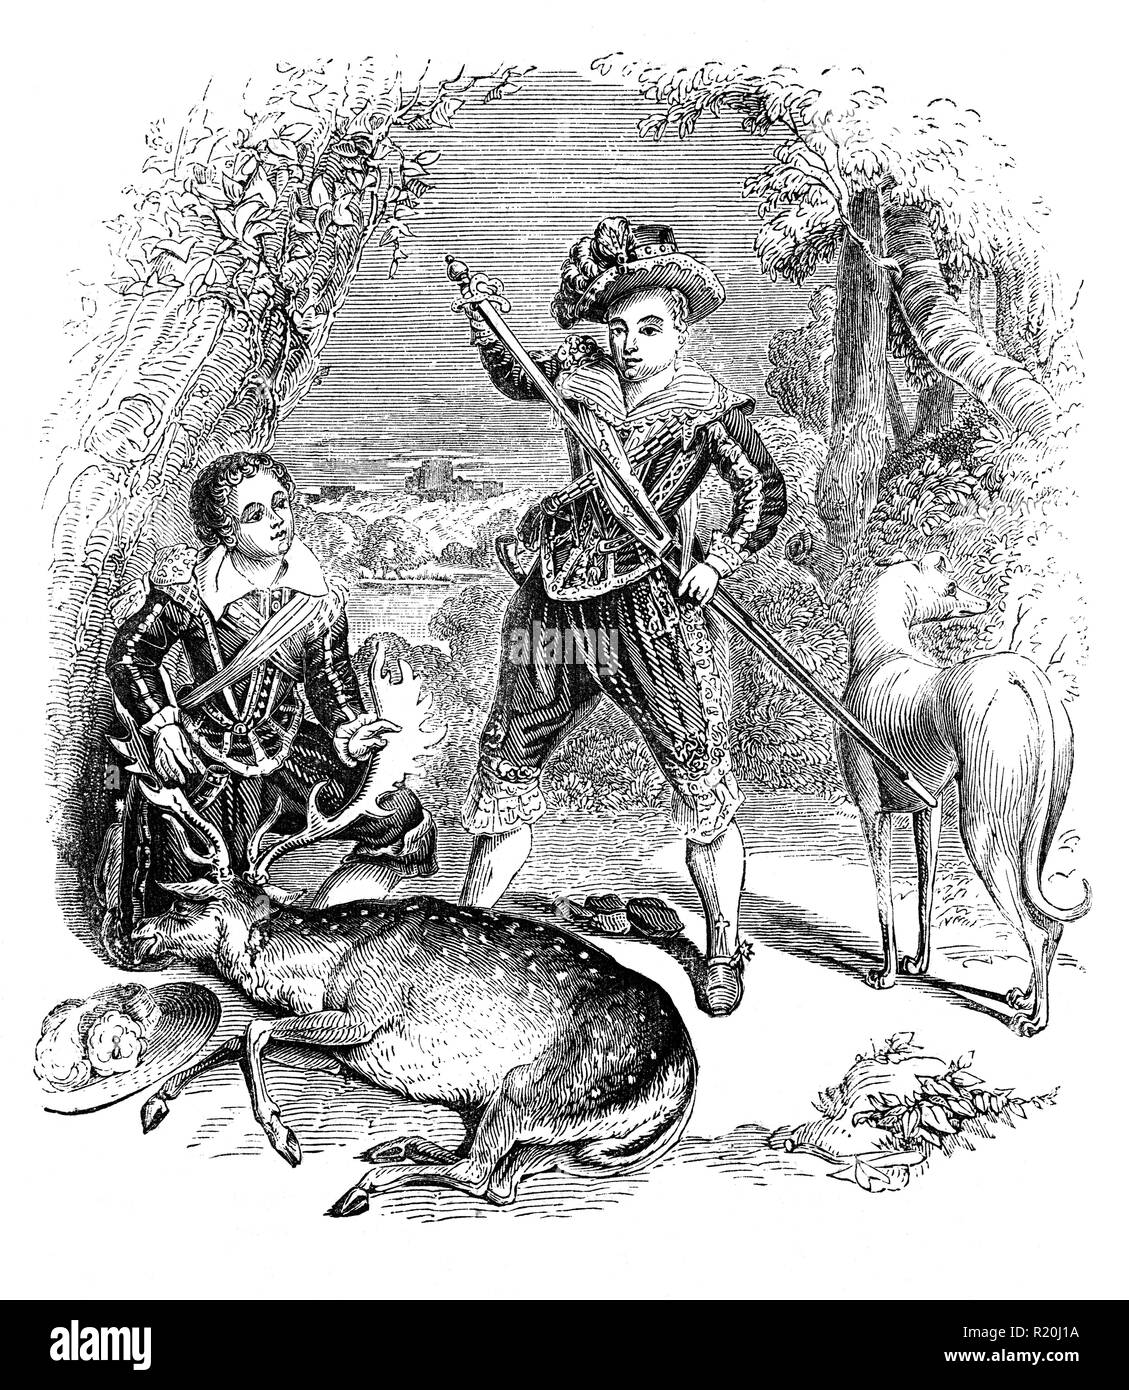 A deer hunt with Lord Harrington and Henry Frederick, Prince of Wales (1594-1612), elder son of James VI and I, King of England and Scotland. His name derives from his grandfathers: Henry Stuart, Lord Darnley, and Frederick II of Denmark. Prince Henry was widely seen as a bright and promising heir to his father's thrones. However, at the age of 18, he predeceased his father when he died of typhoid fever. His younger brother Charles succeeded him as heir apparent to the English, Irish and Scottish thrones. Stock Photo